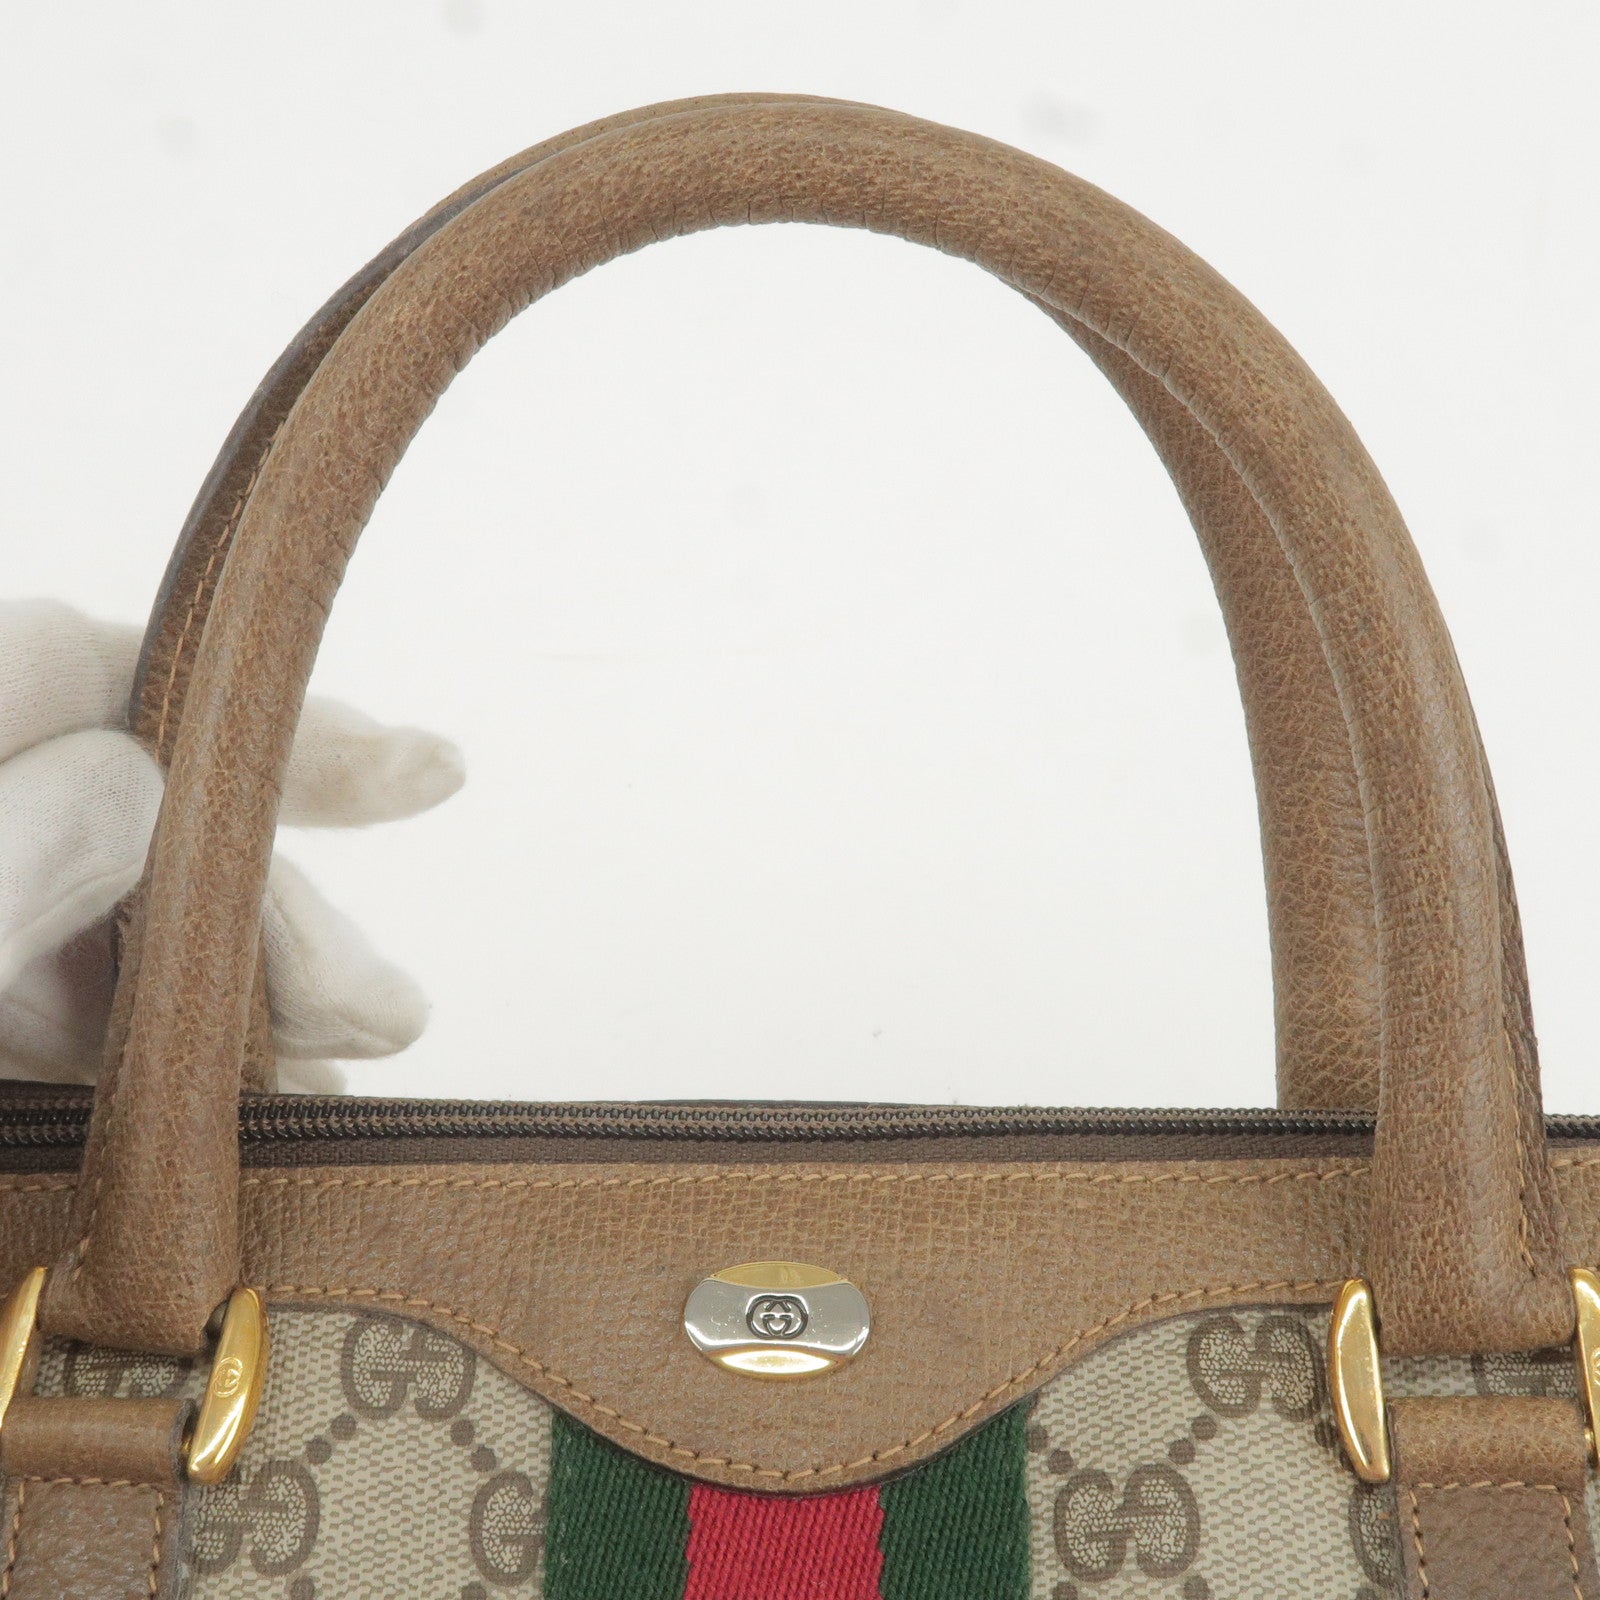 Gucci Plus vintage 80's Boston bag - great used condition US Seller No  Smell